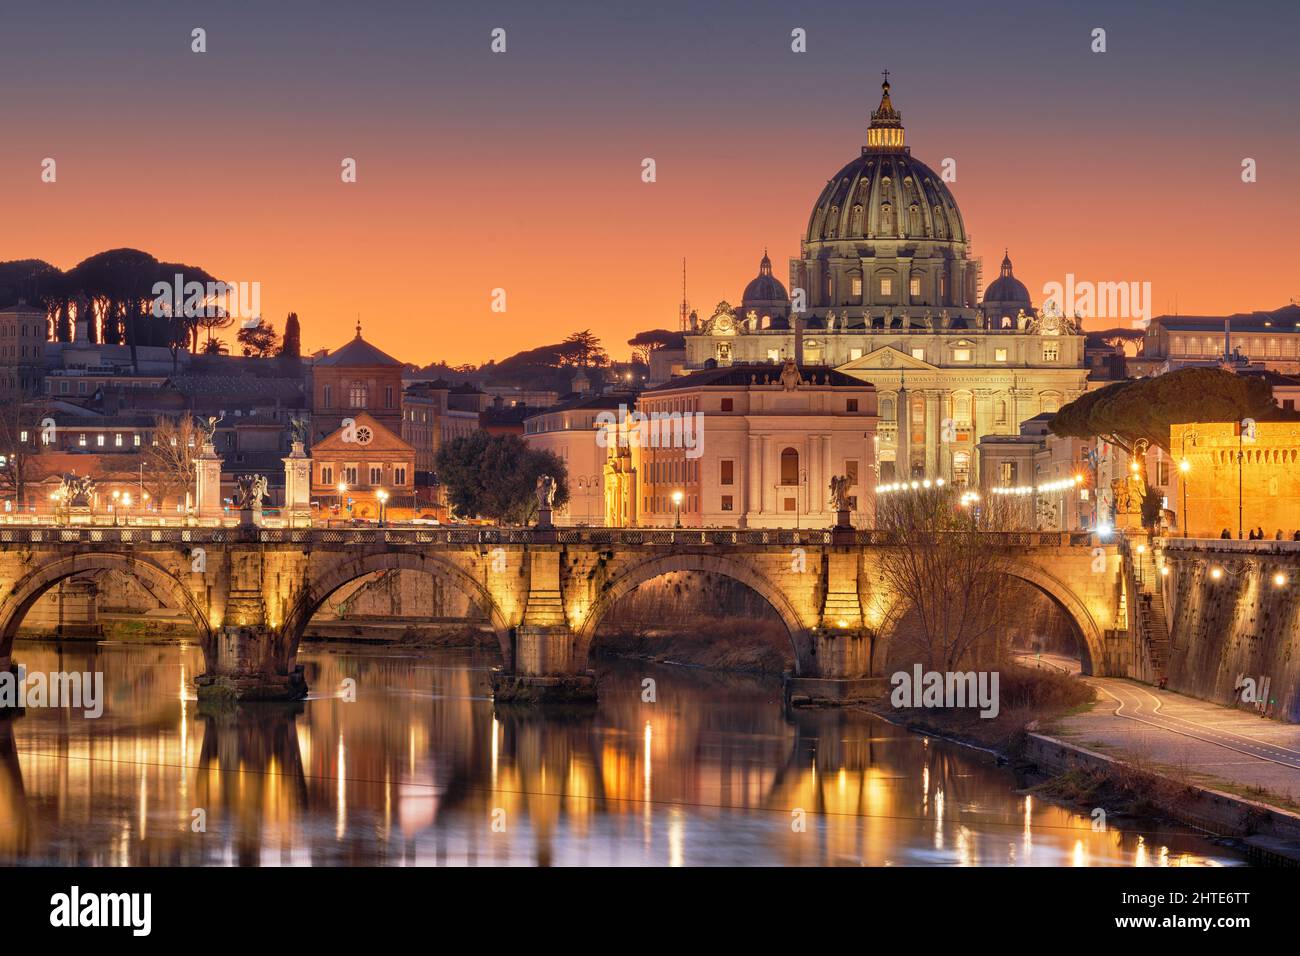 St. Peter's Basilica in Vatican City on the Tiber River through Rome, Italy at dusk. Stock Photo